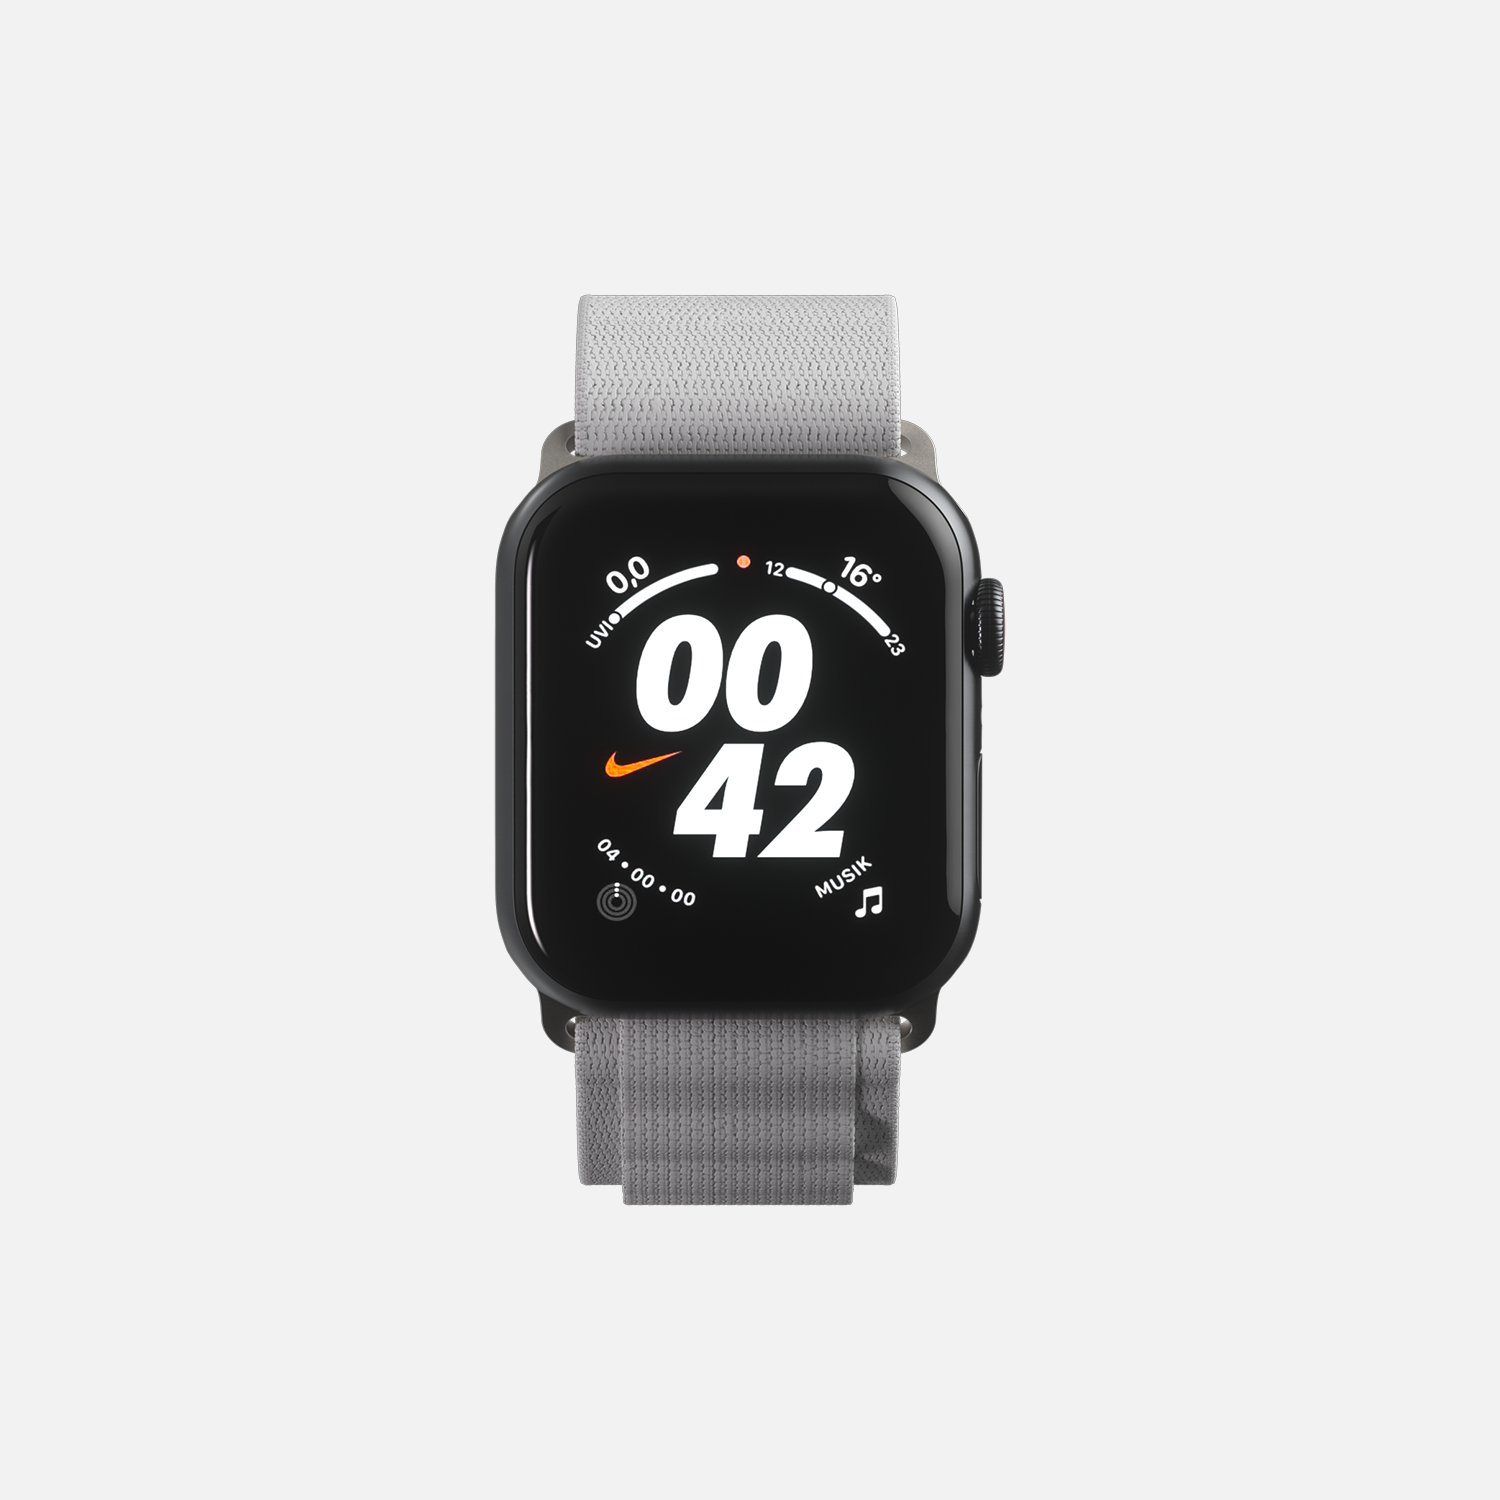 Smartwatch with Nike interface and gray strap showcasing time and fitness metrics"